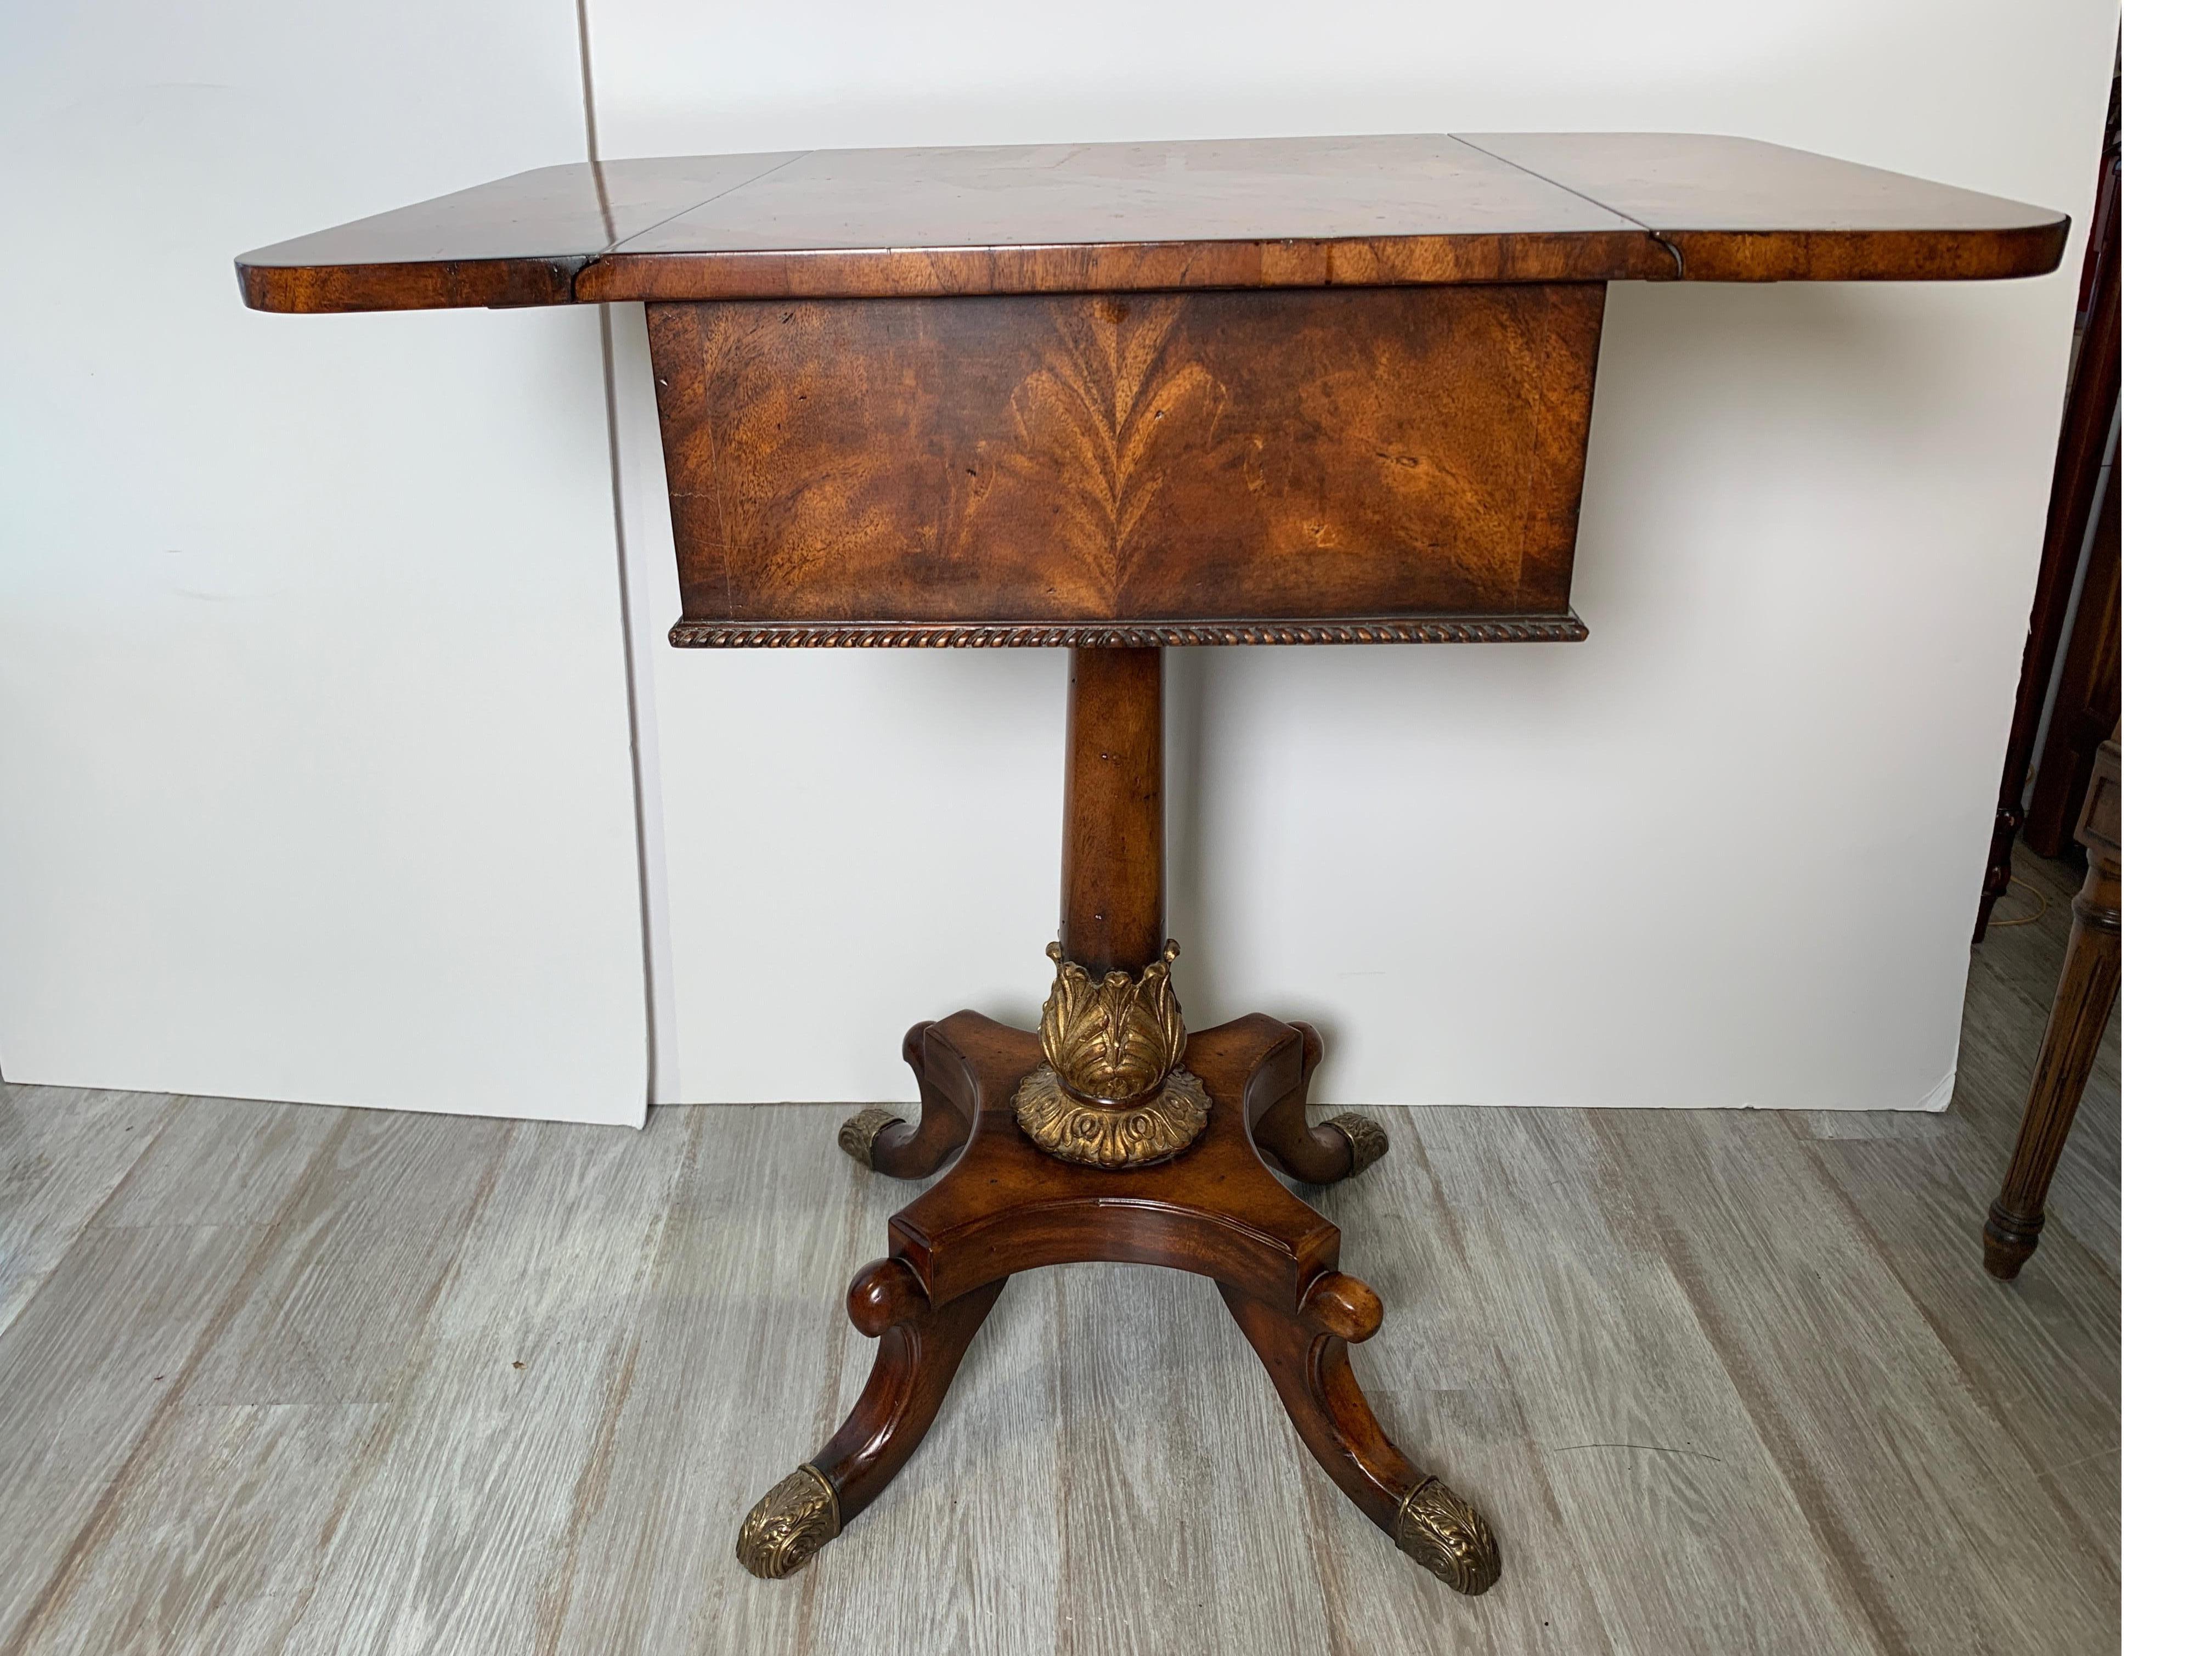 Gilt Drop Leaf Pedestal Table with Drawers by Theodore Alexander